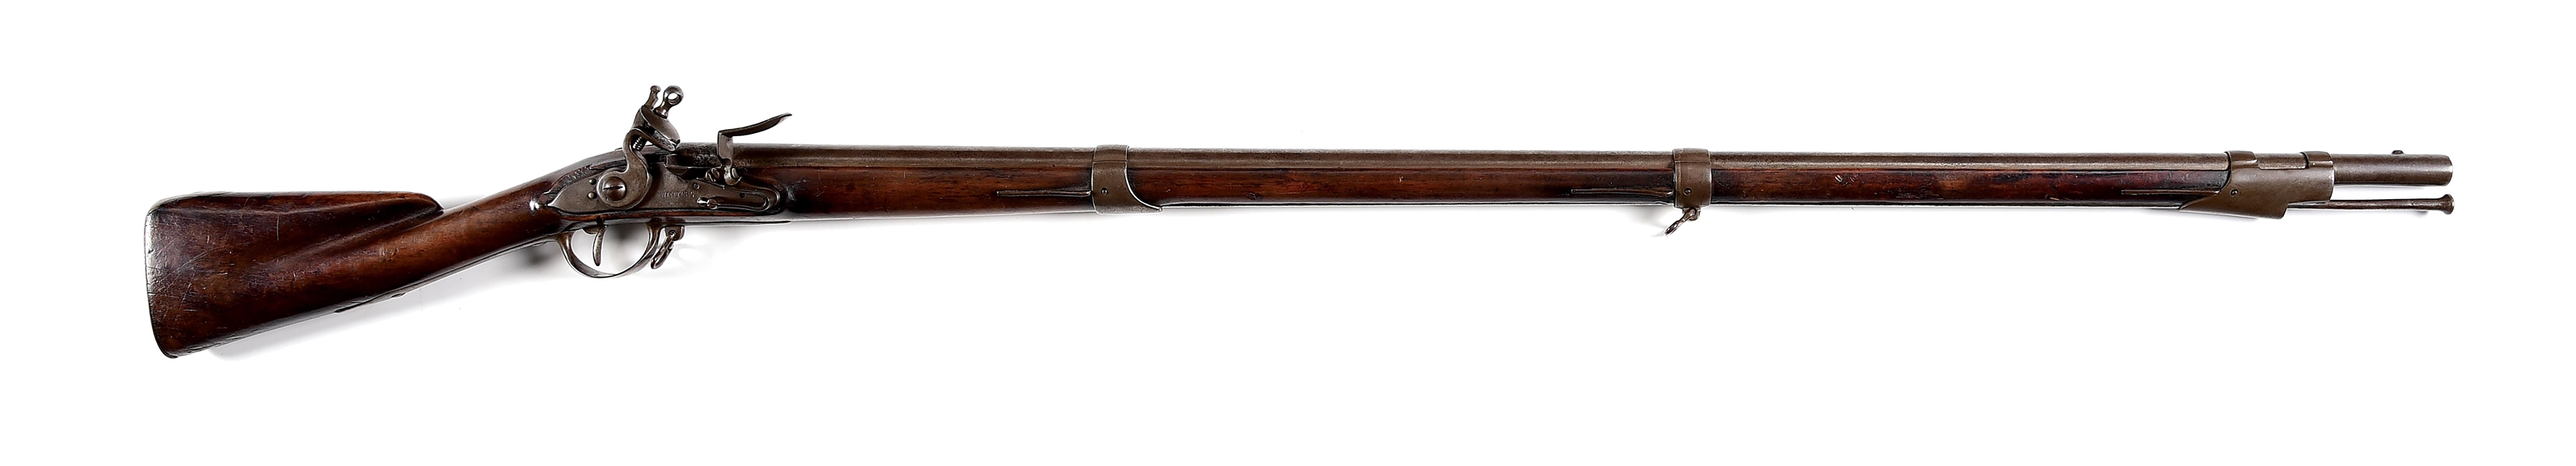 (A) FRENCH MODEL 1766/68 MUSKET MARKED WINTERS AND MARYLAND.